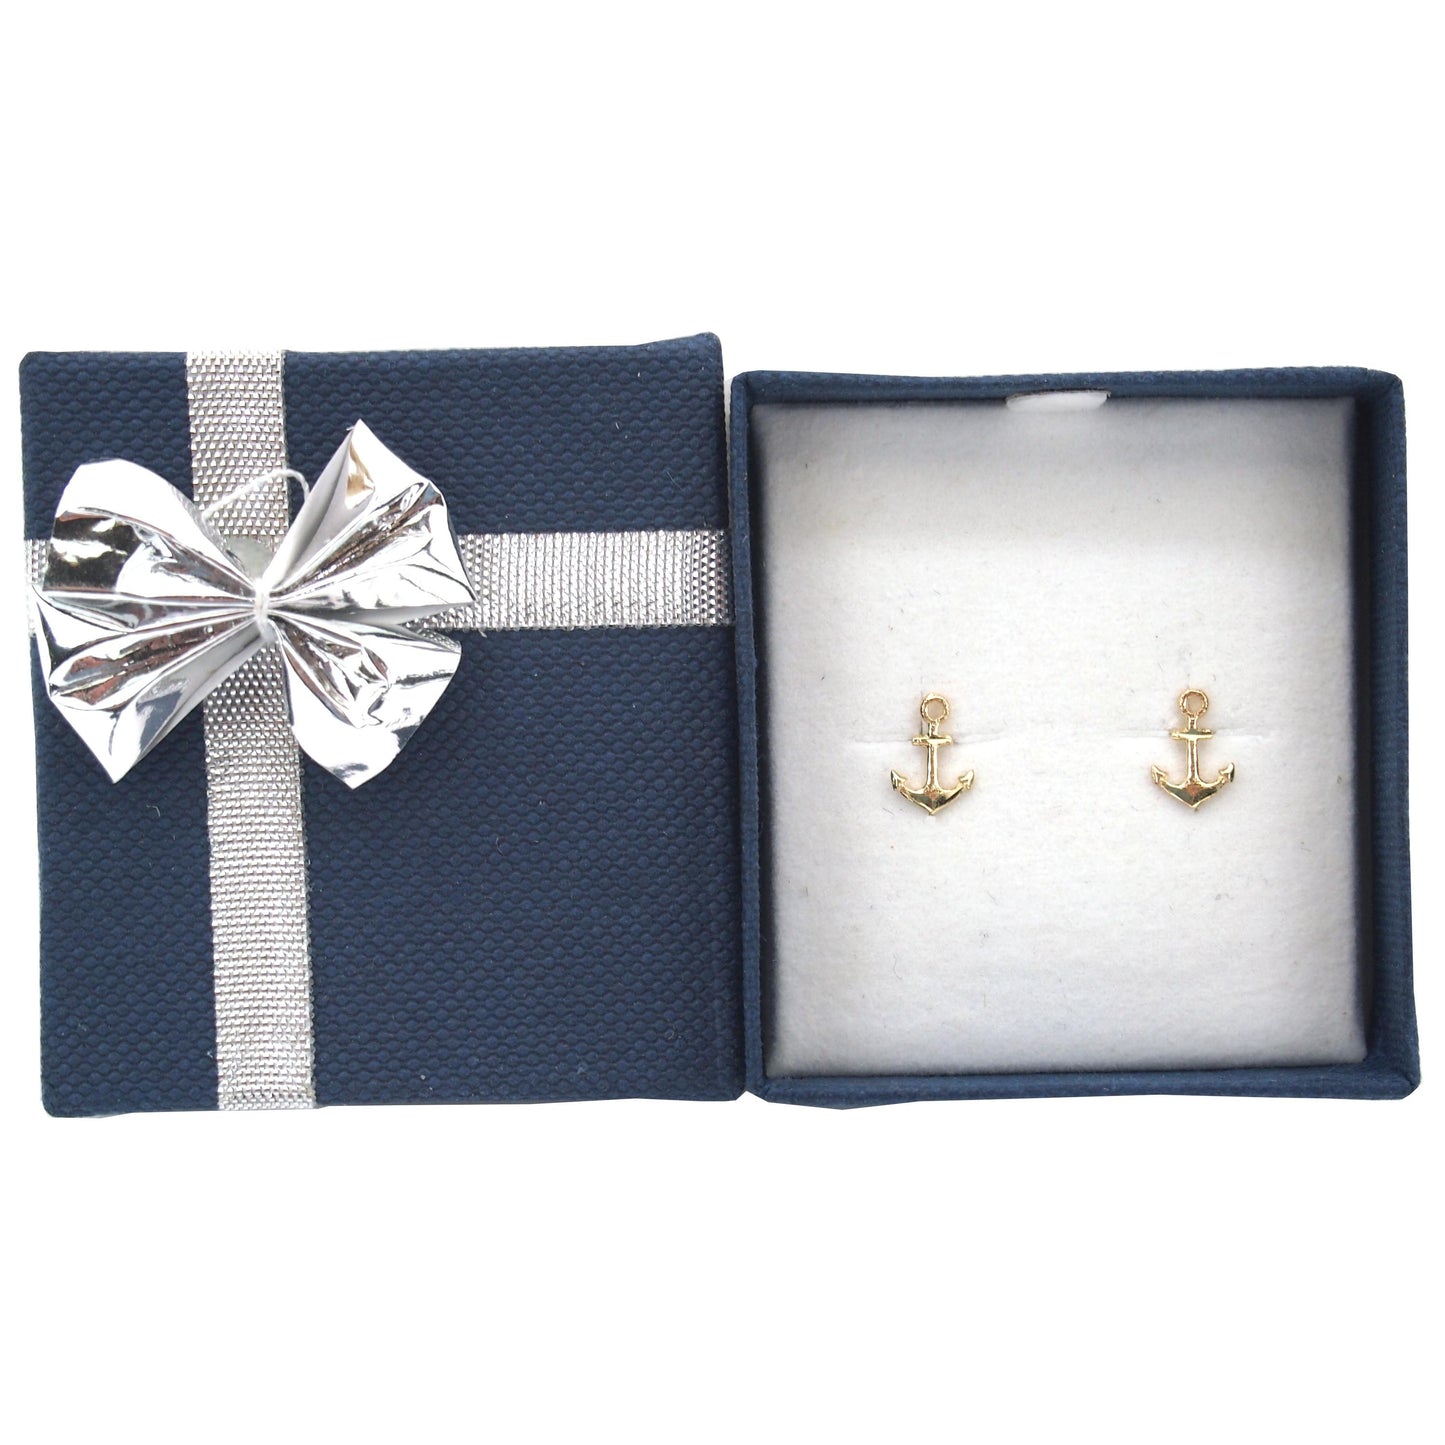 14K Yellow Gold Anchor Earings with Bow Tie Gift Box